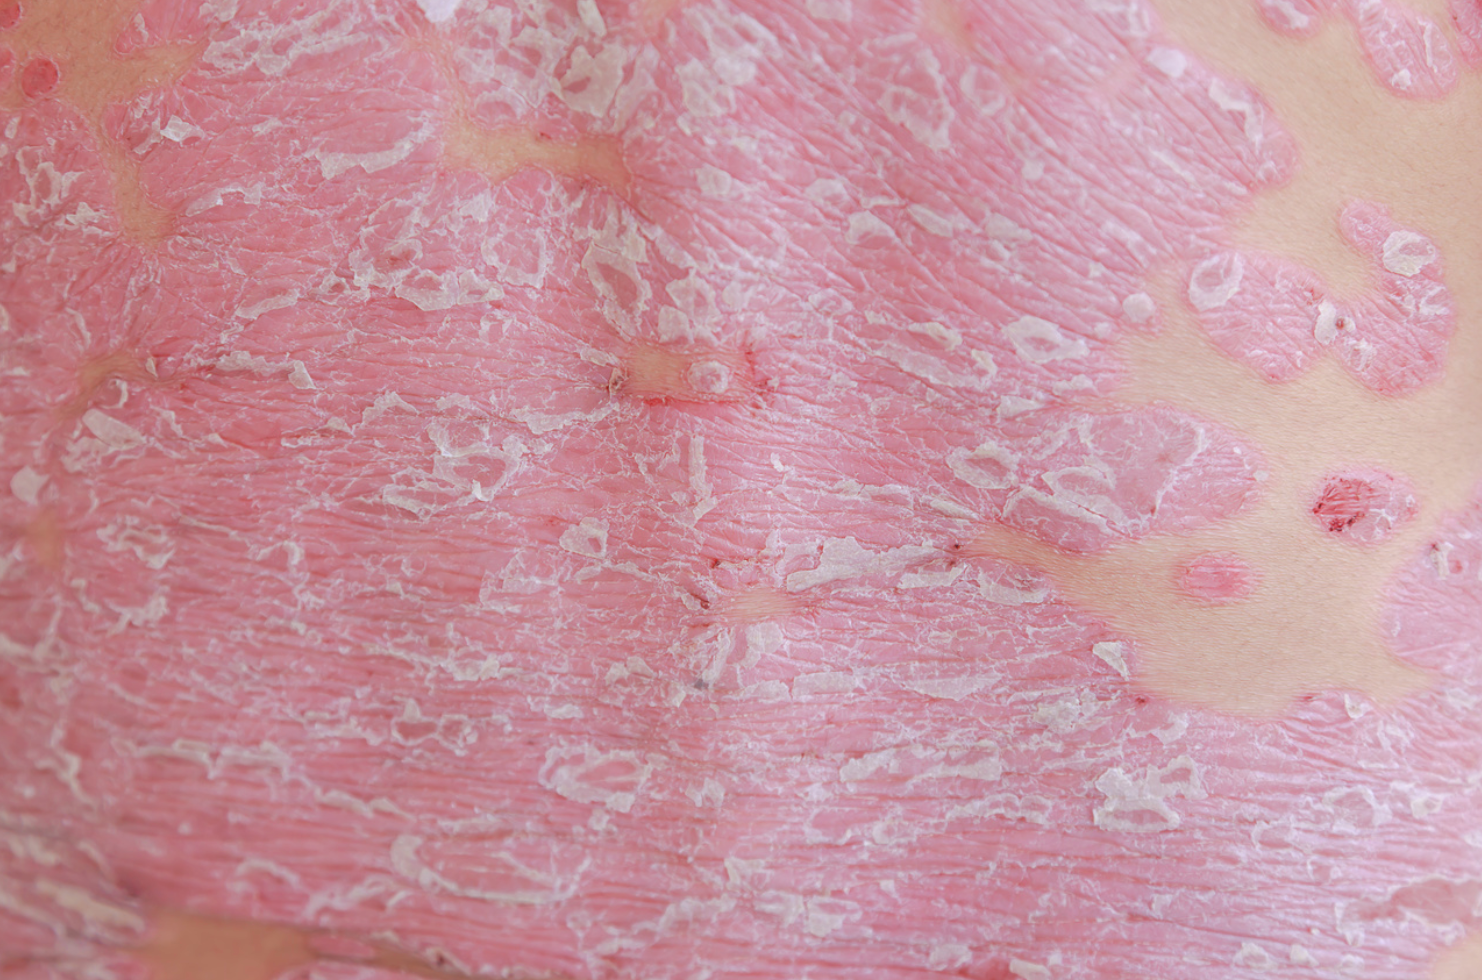 Celiac Disease May Increase the Risk of Developing Psoriasis